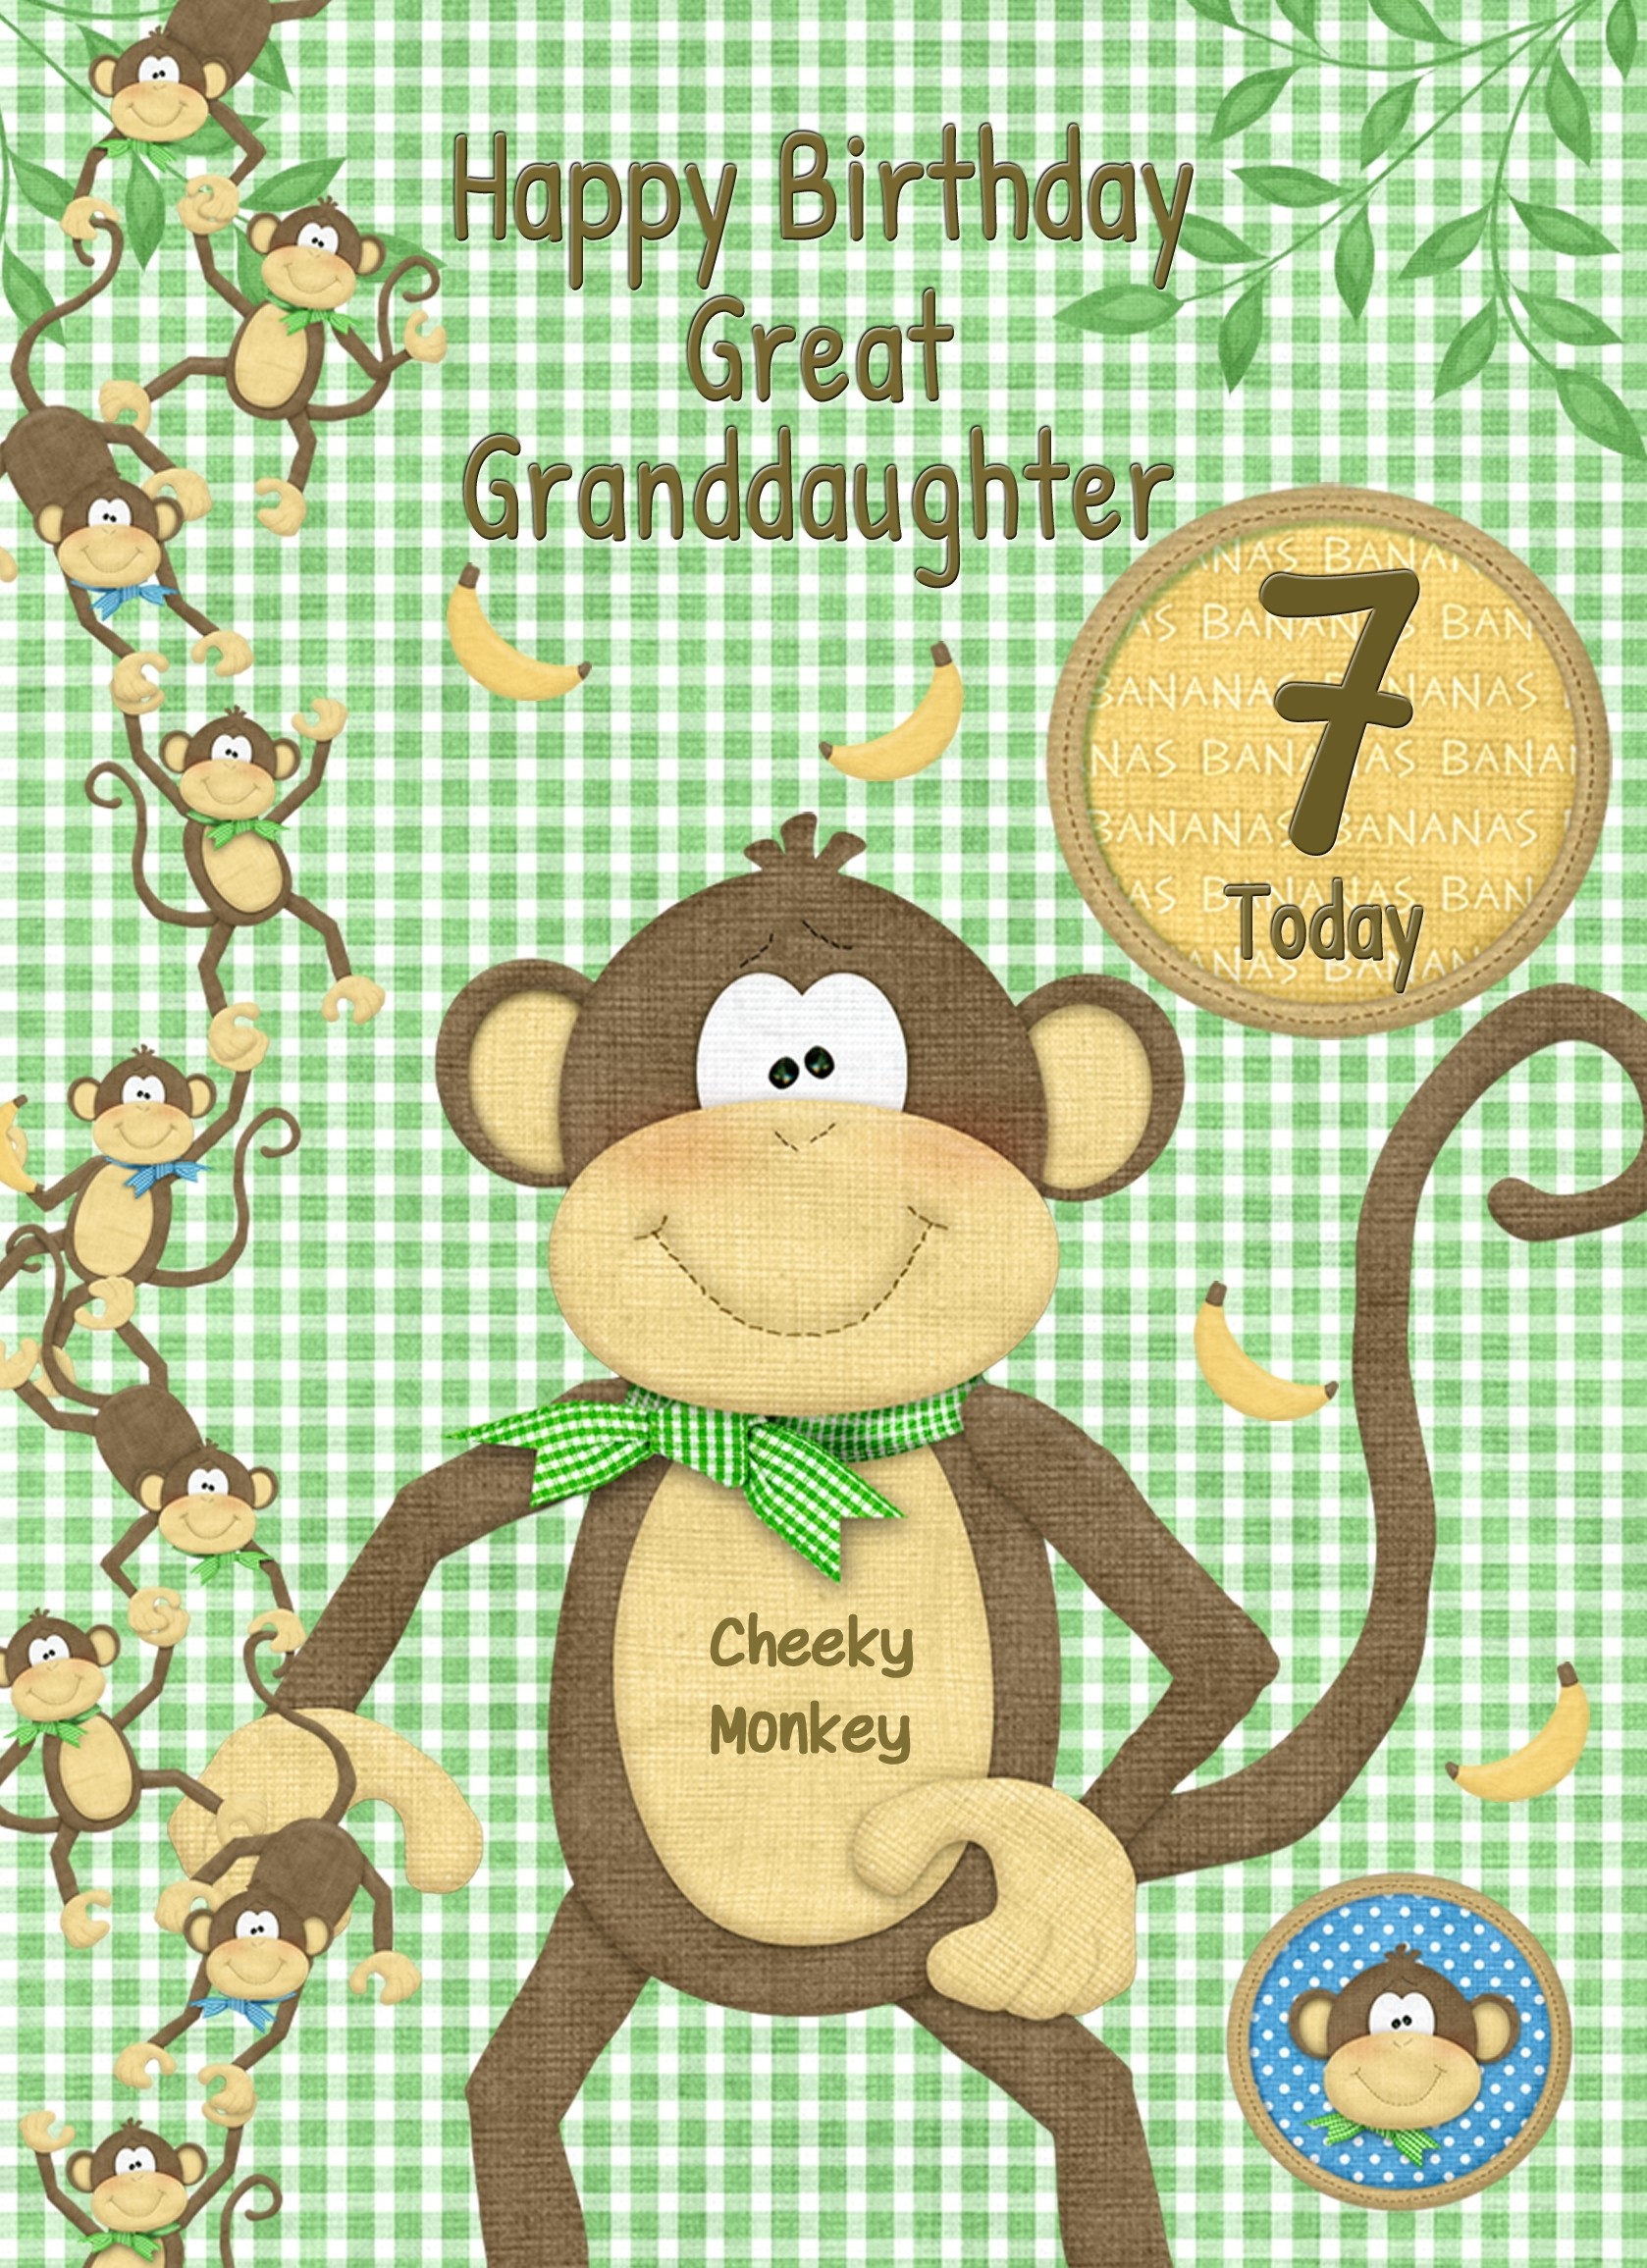 Kids 7th Birthday Cheeky Monkey Cartoon Card for Great Granddaughter